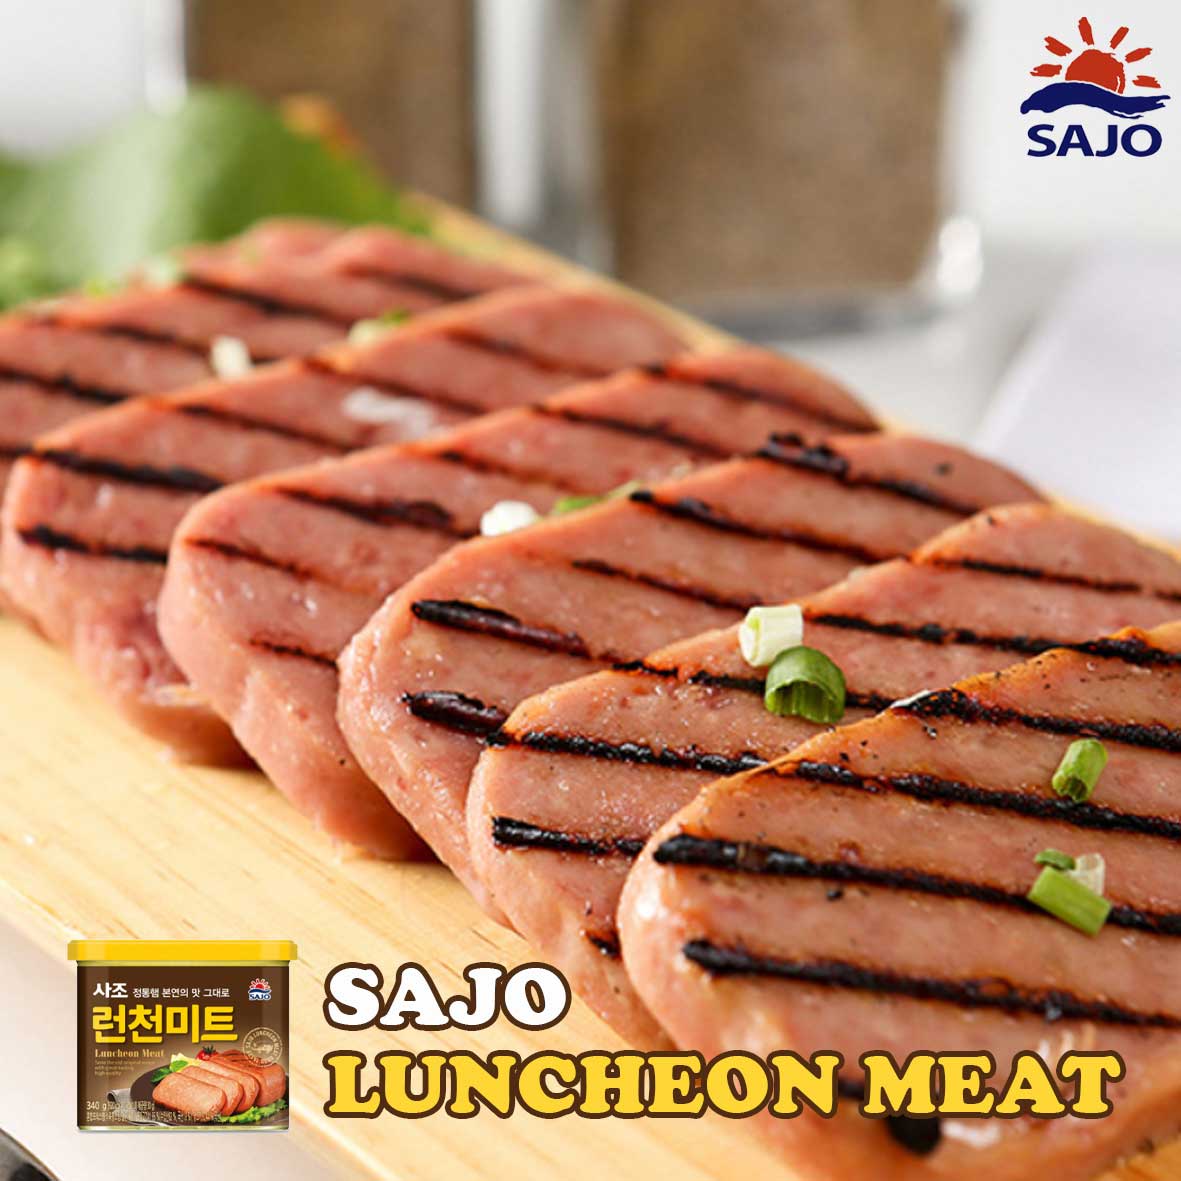 sajo-luncheon-meat-new-two